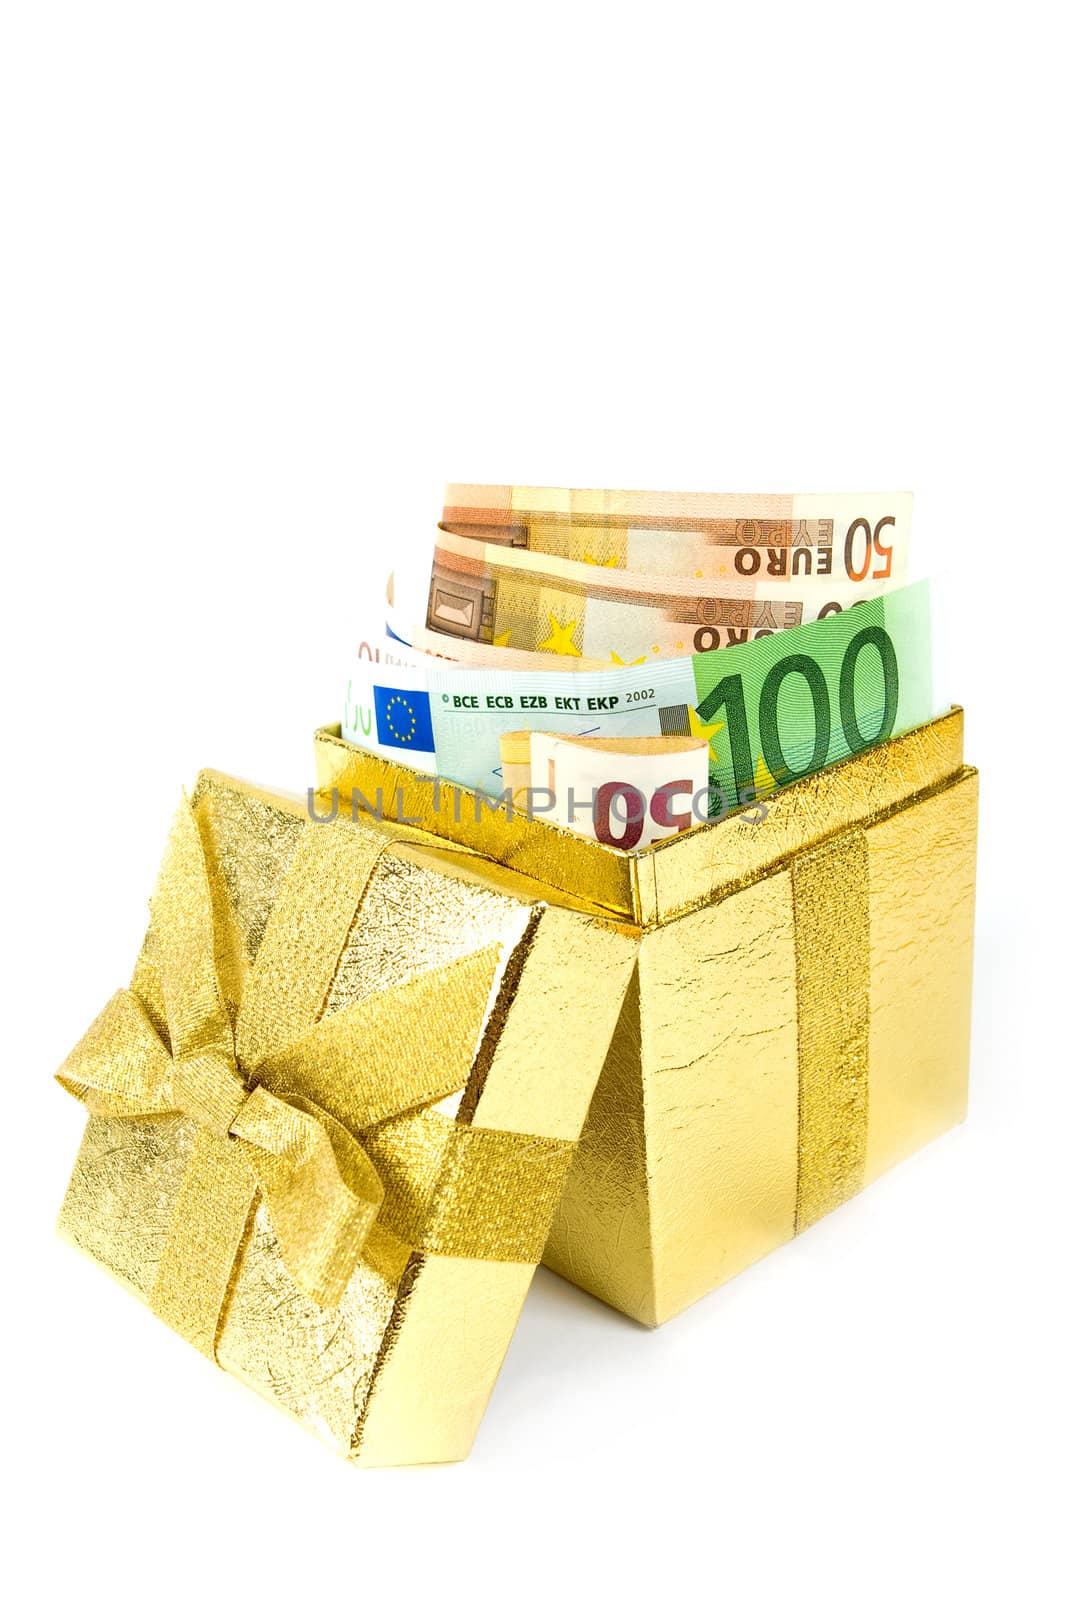 Euro money in golden gift box by rachwal